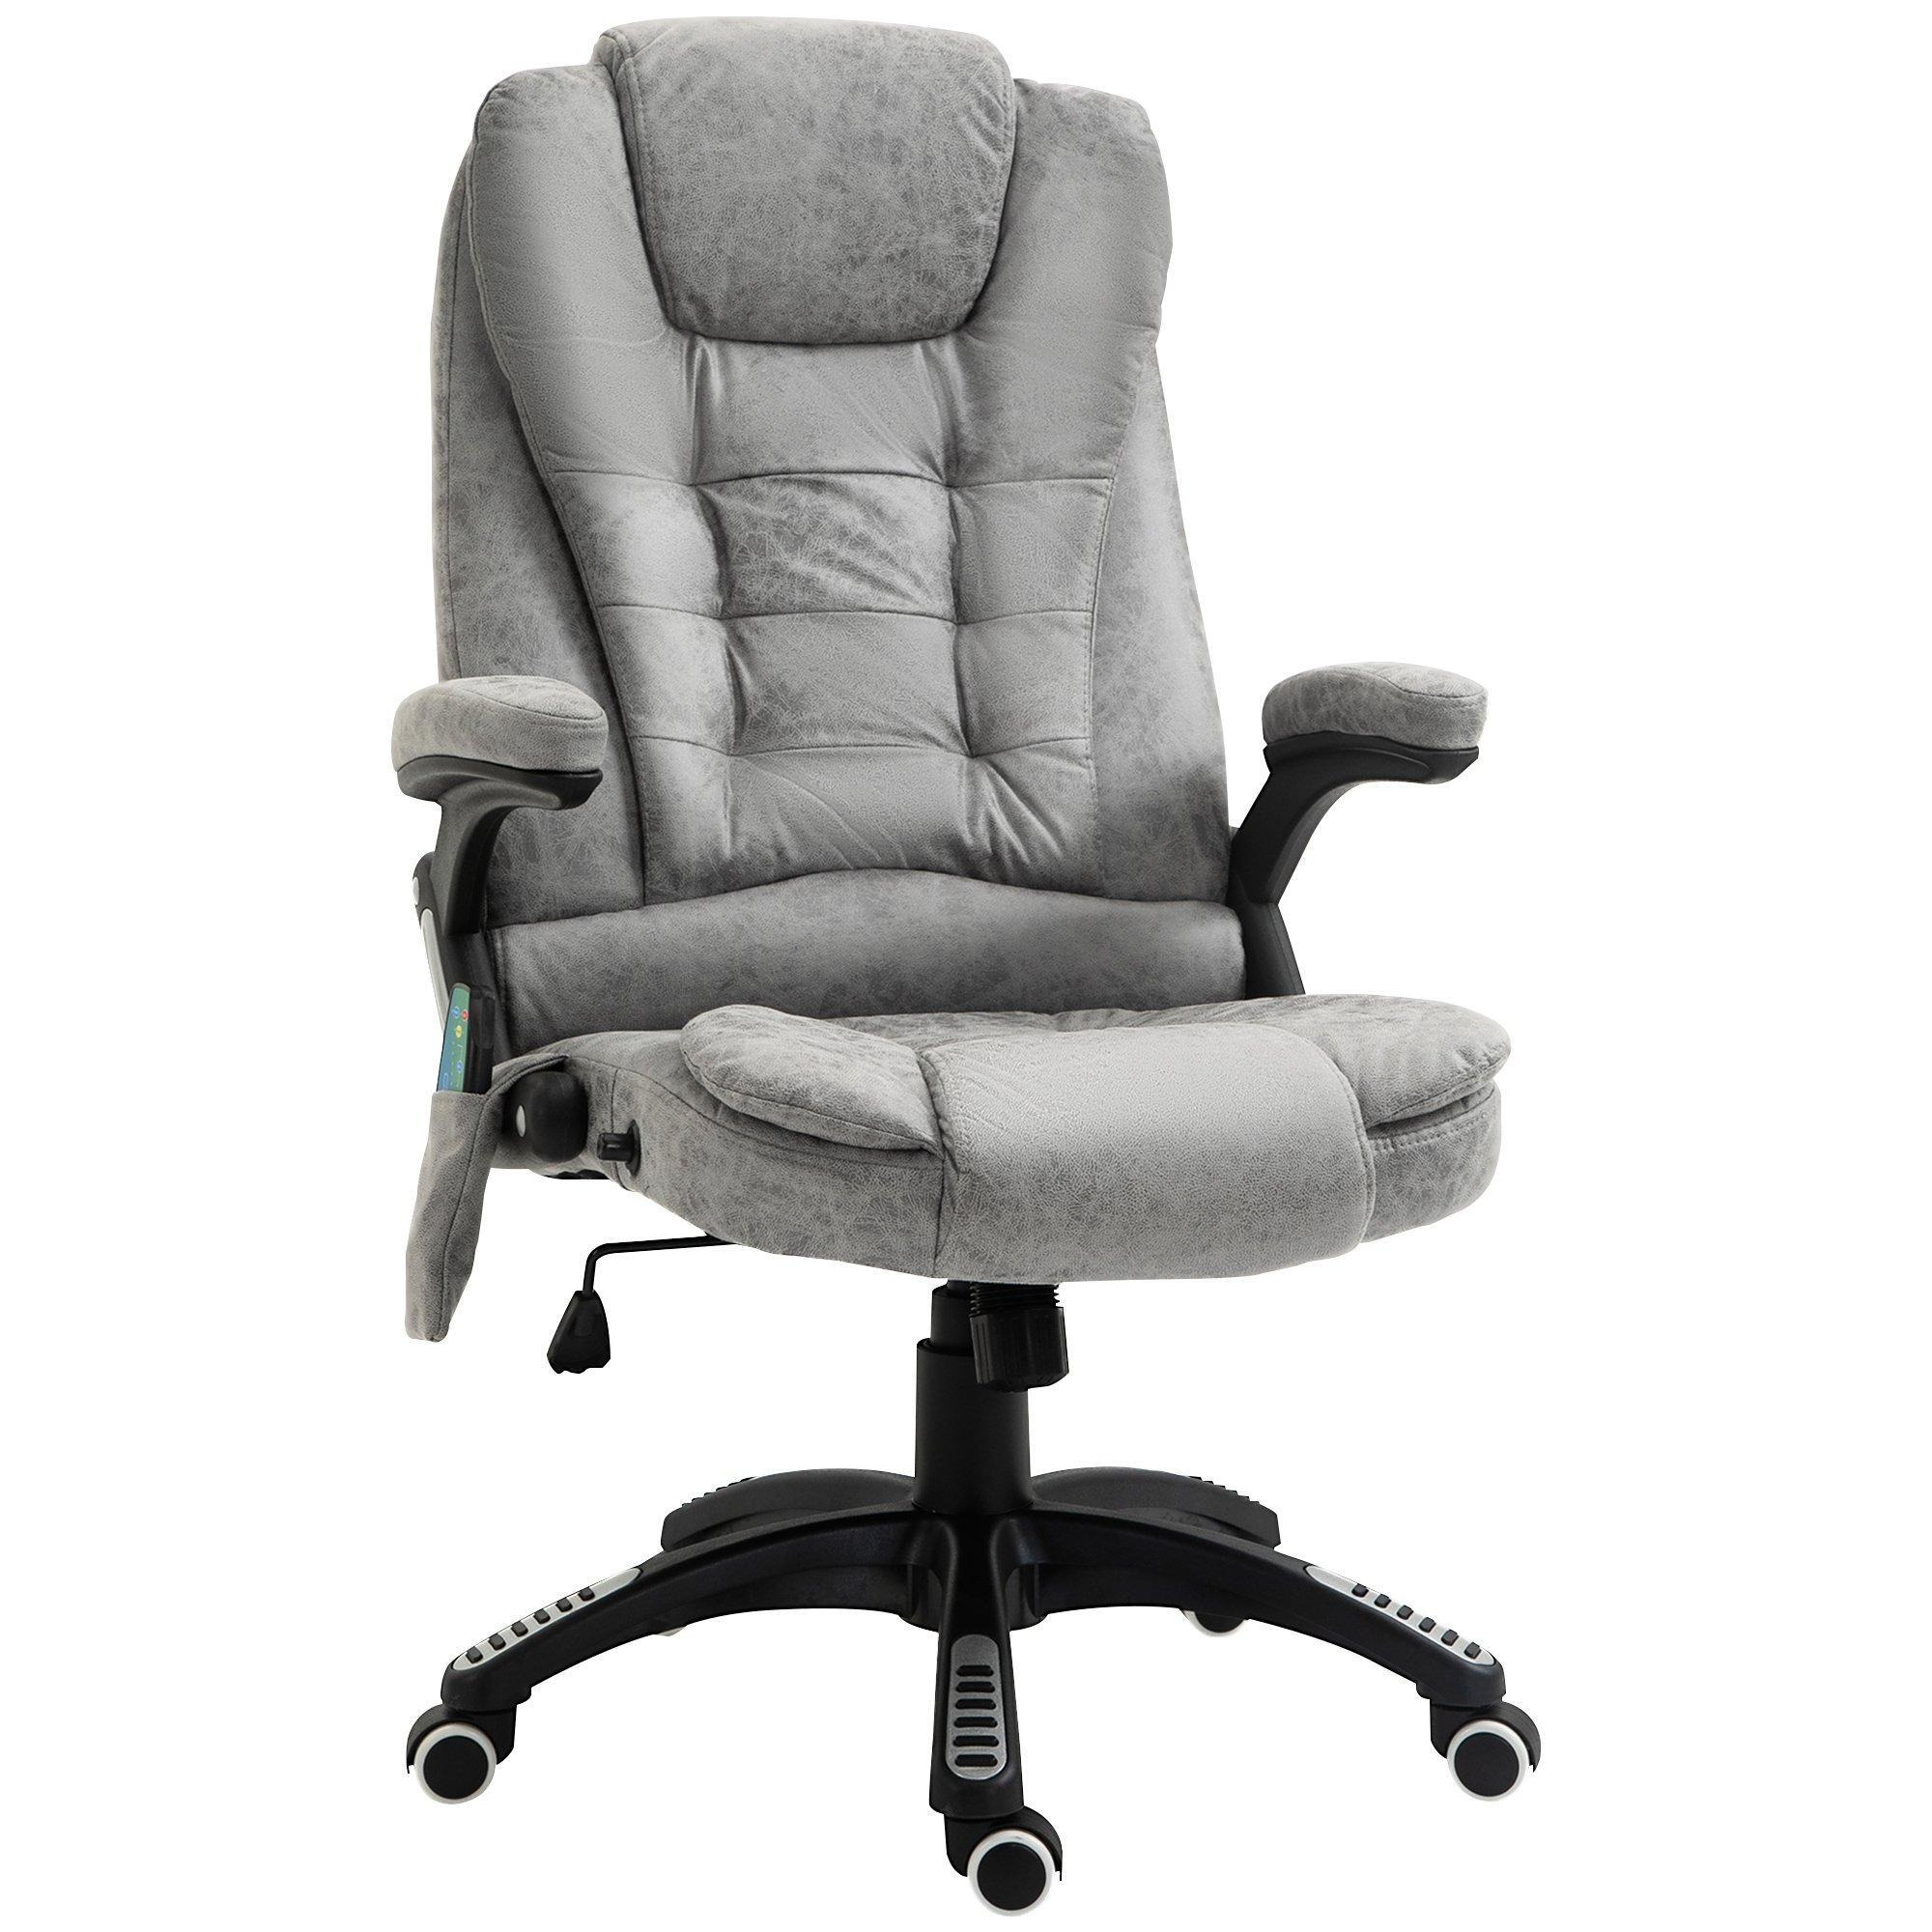 Executive Reclining Chair with Heating Massage Points Relaxing - image 1